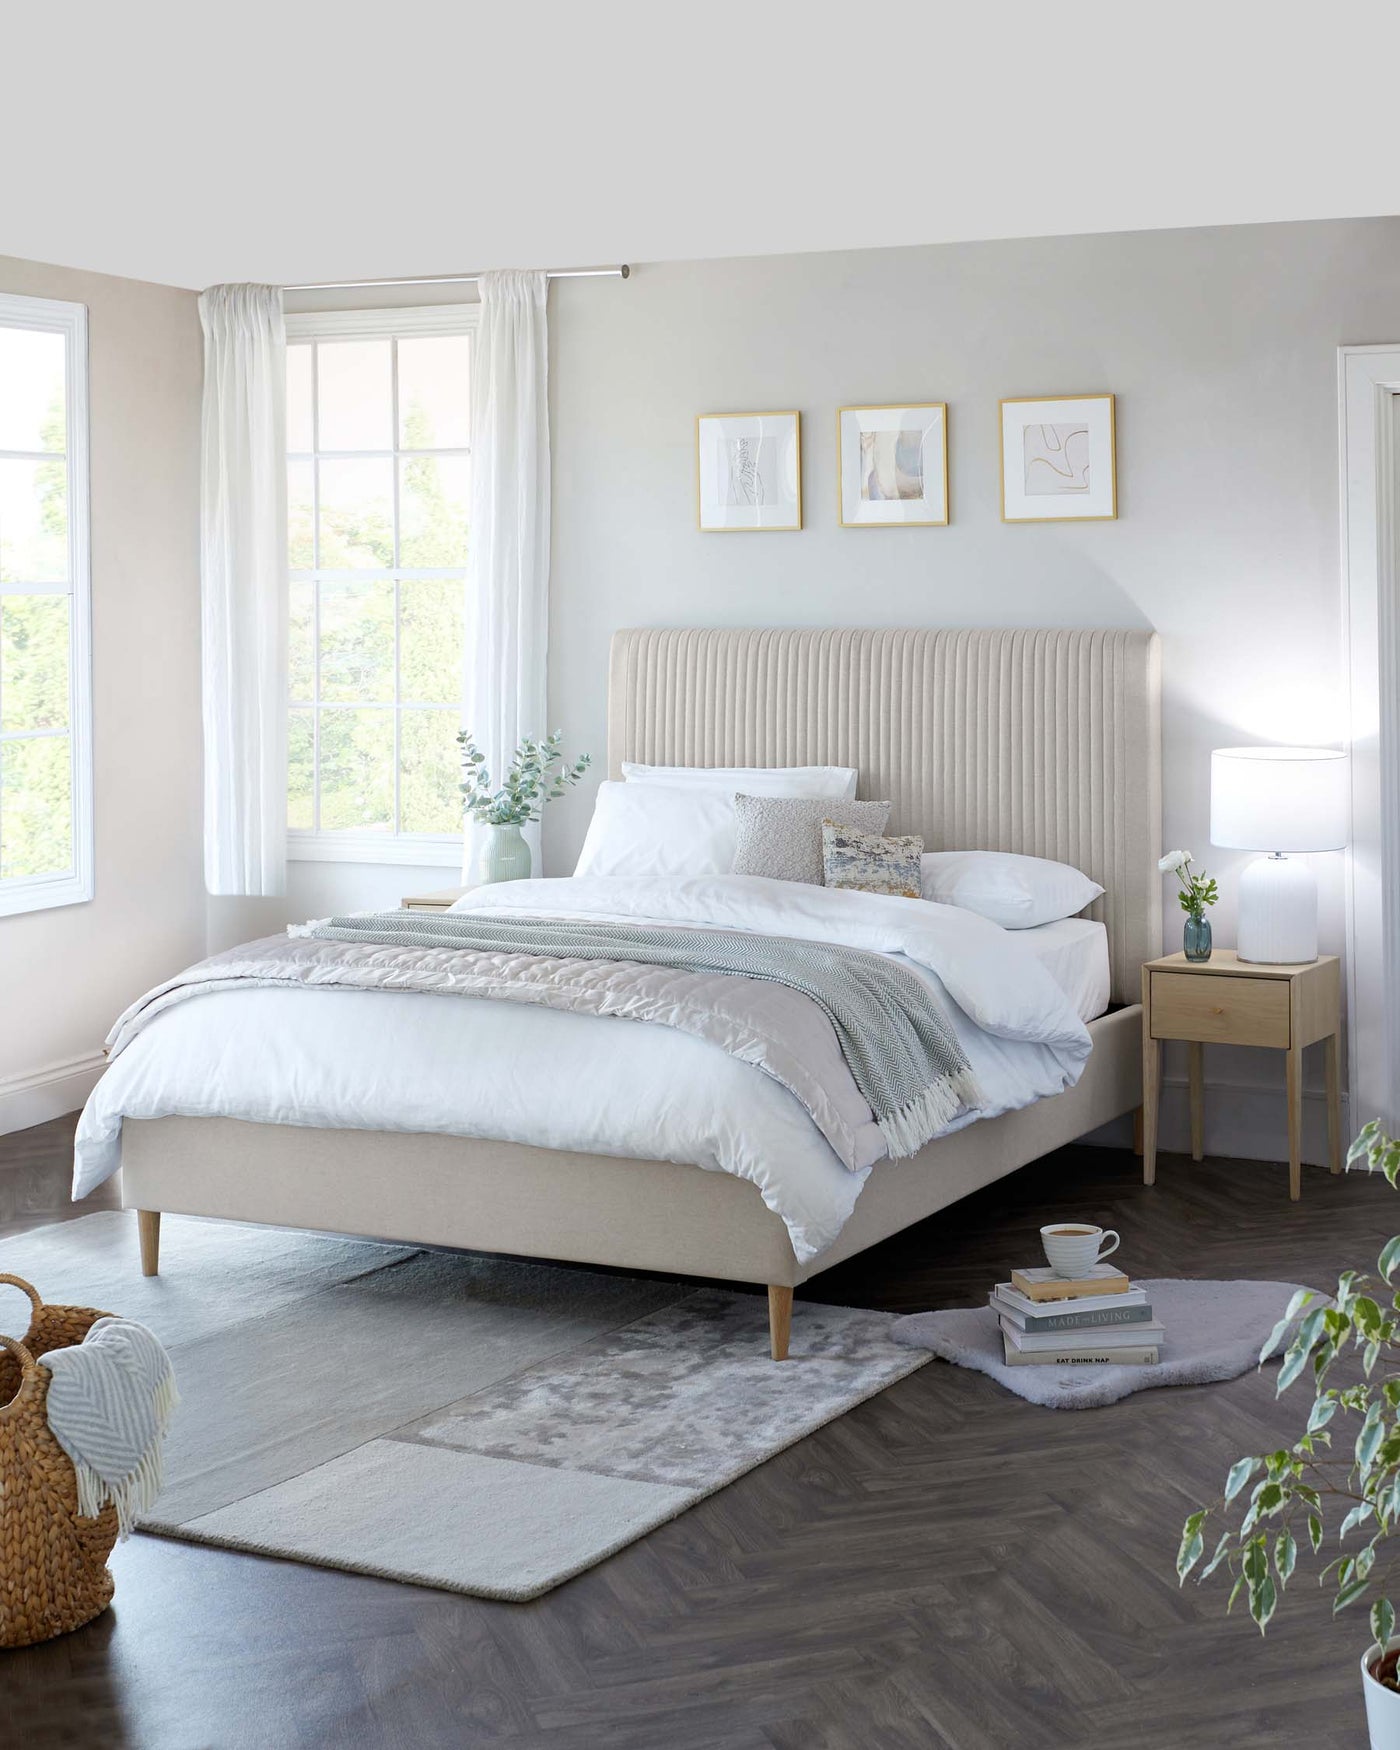 A contemporary bedroom scene featuring a queen-sized bed with an upholstered, ribbed headboard in a neutral tone. On either side of the bed is a minimalist nightstand with a natural wood finish. Each nightstand is complemented by a sleek, white lamp. The room is further accented by a textured throw draped across the bed, a woven basket on the floor, and artwork on the wall, creating a serene and stylish sleeping space.